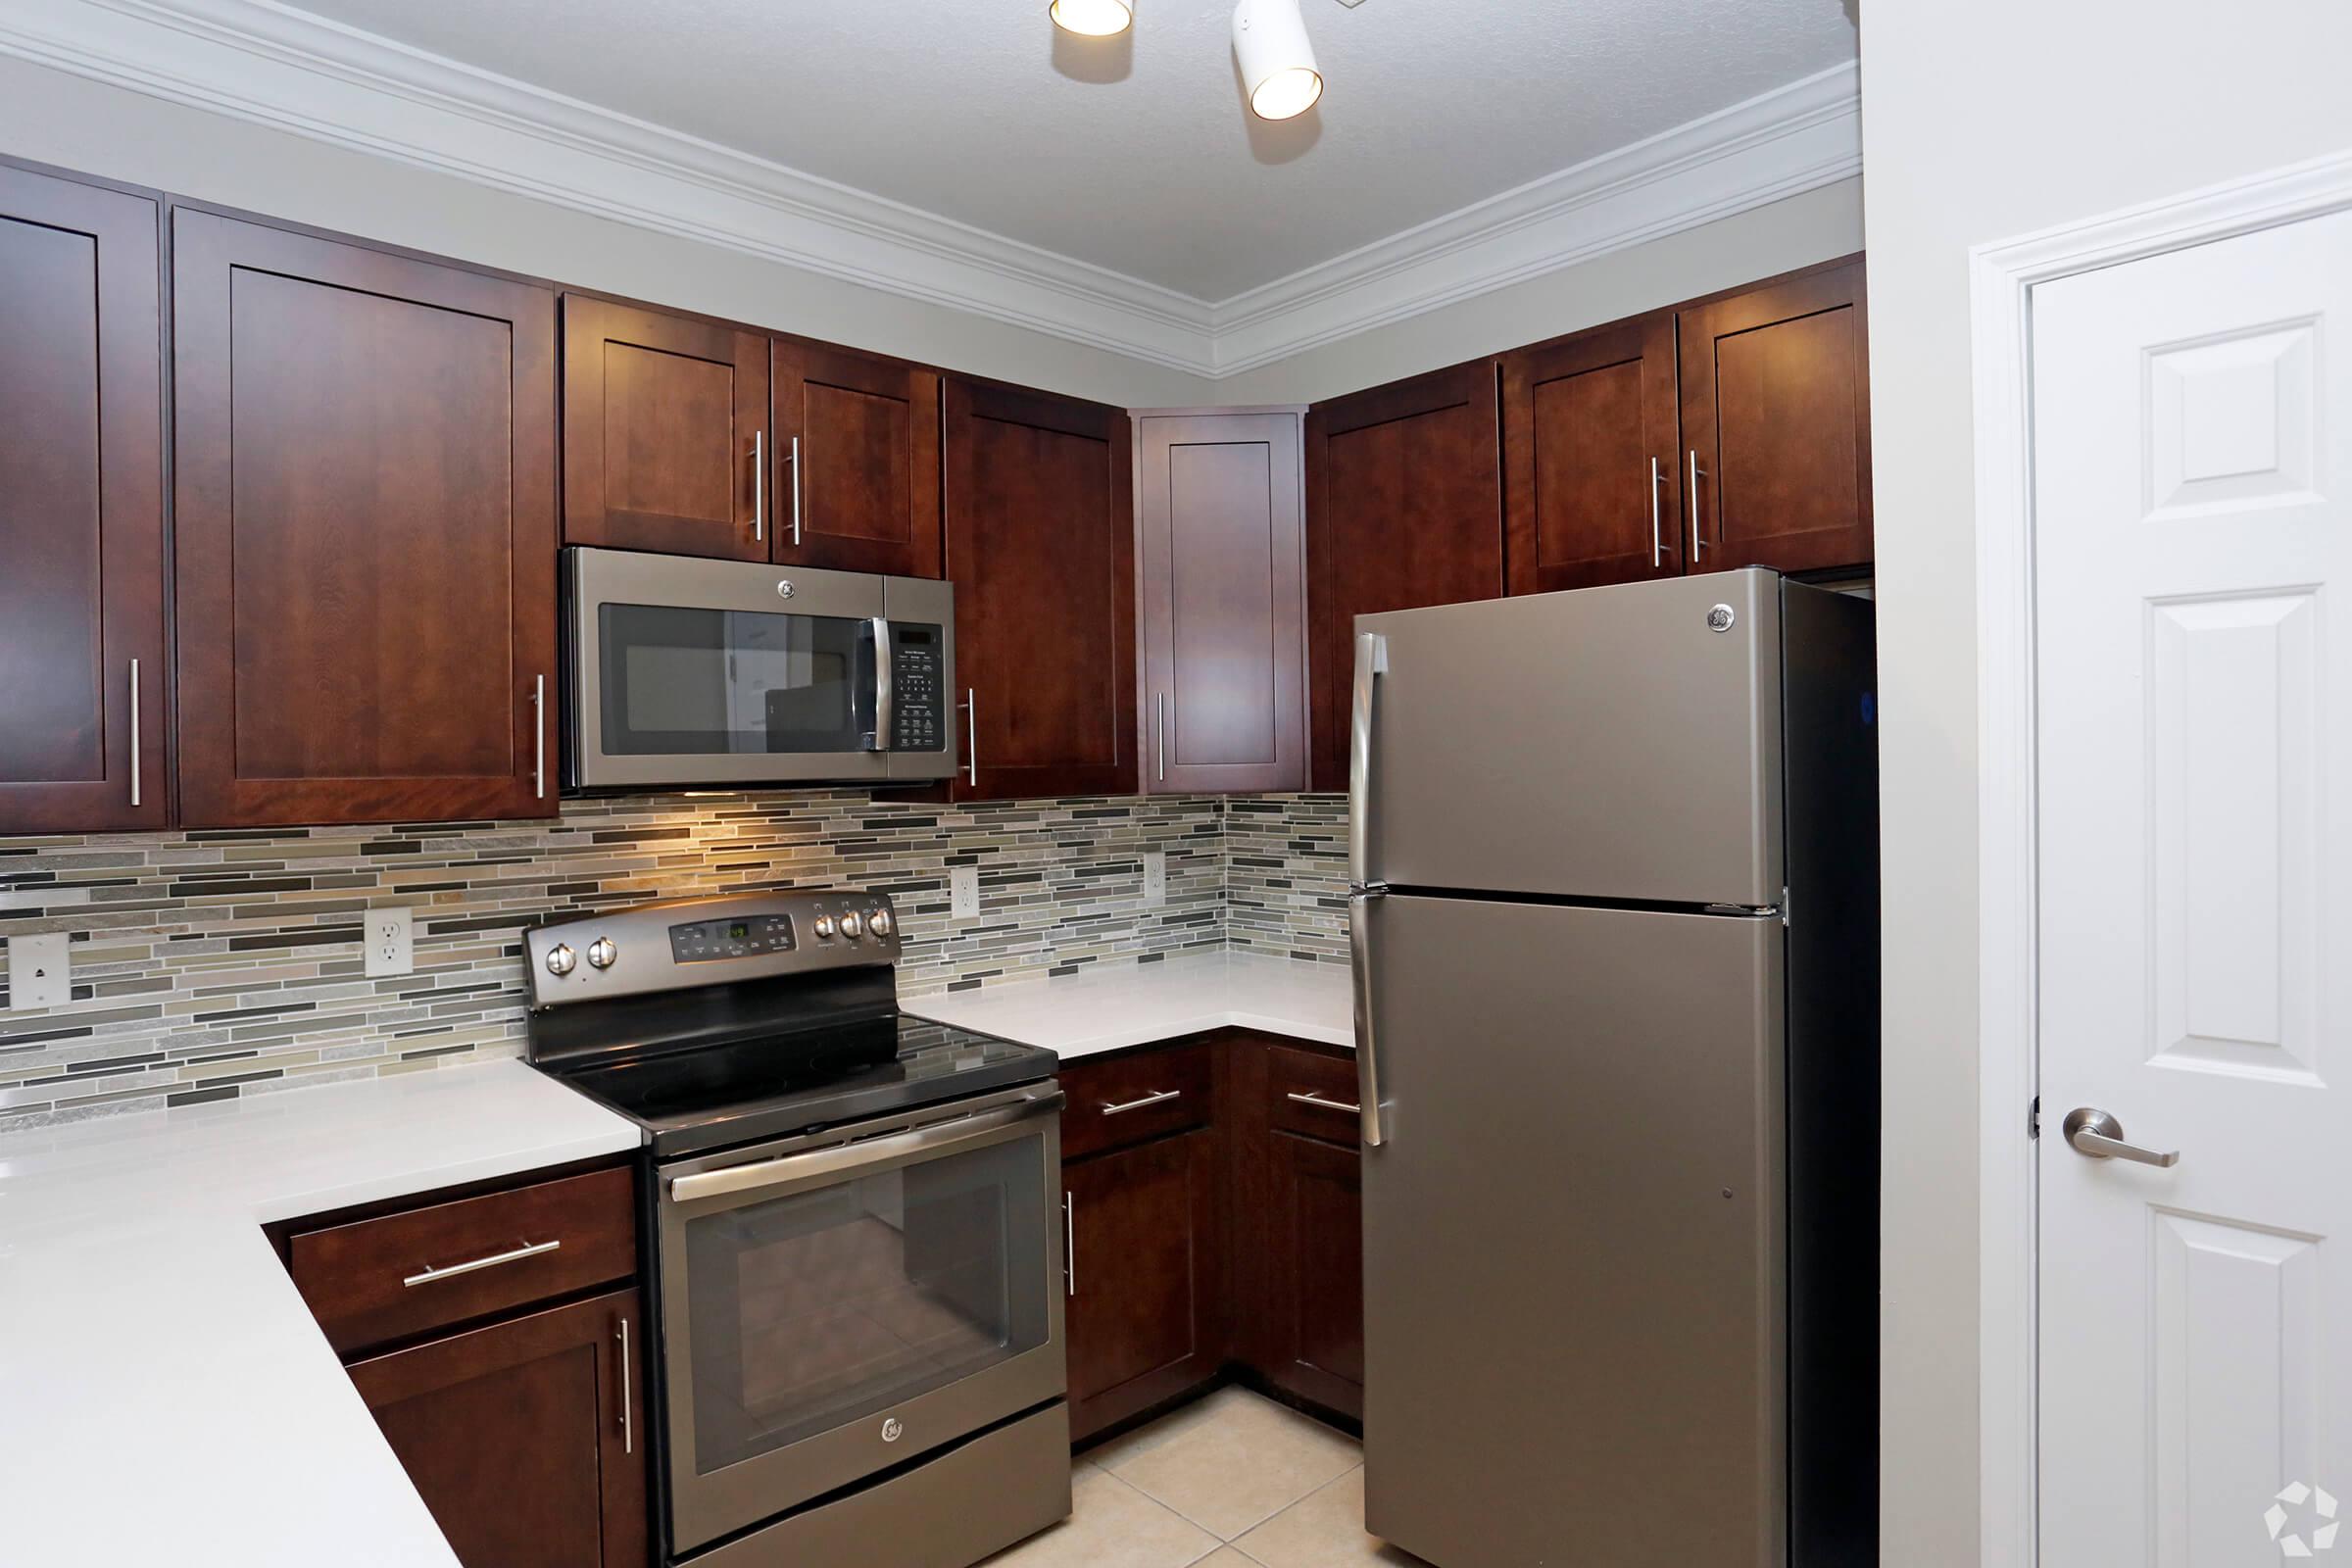 Kitchen at Emerson at Cherry Lane Apartments in Laurel, MD